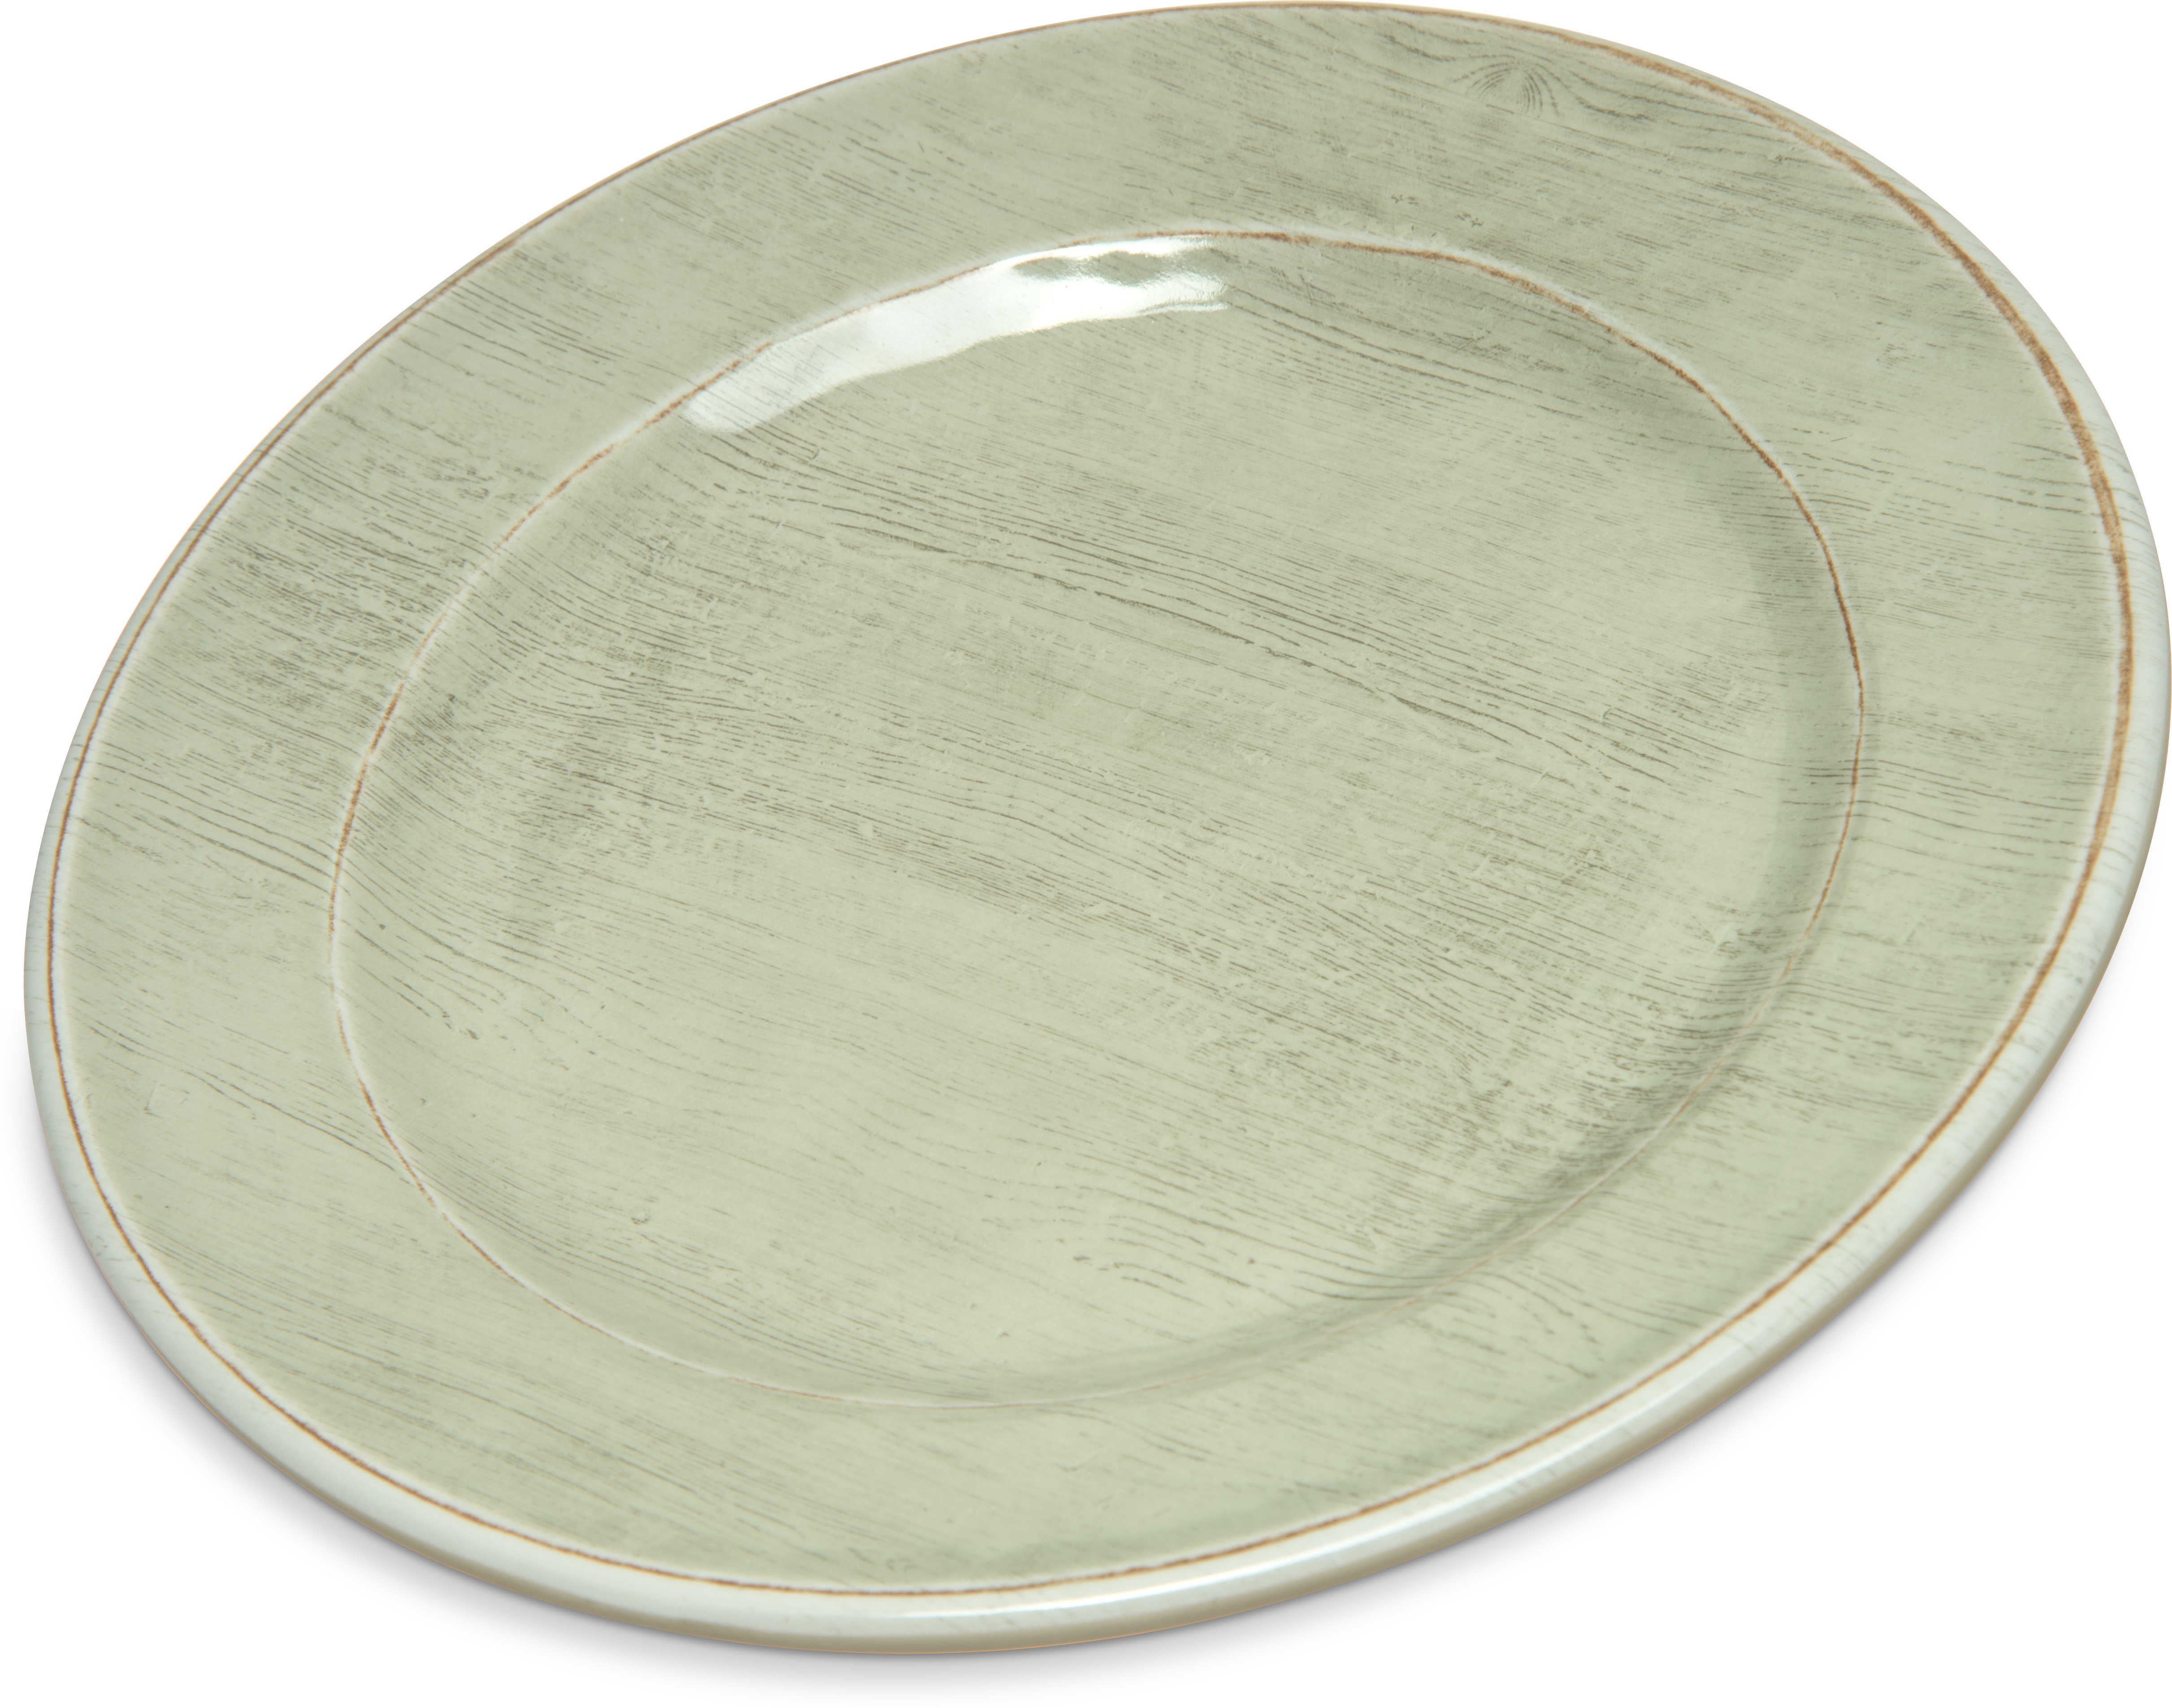 Grove Melamine Bread And Butter Plate 7 - Jade